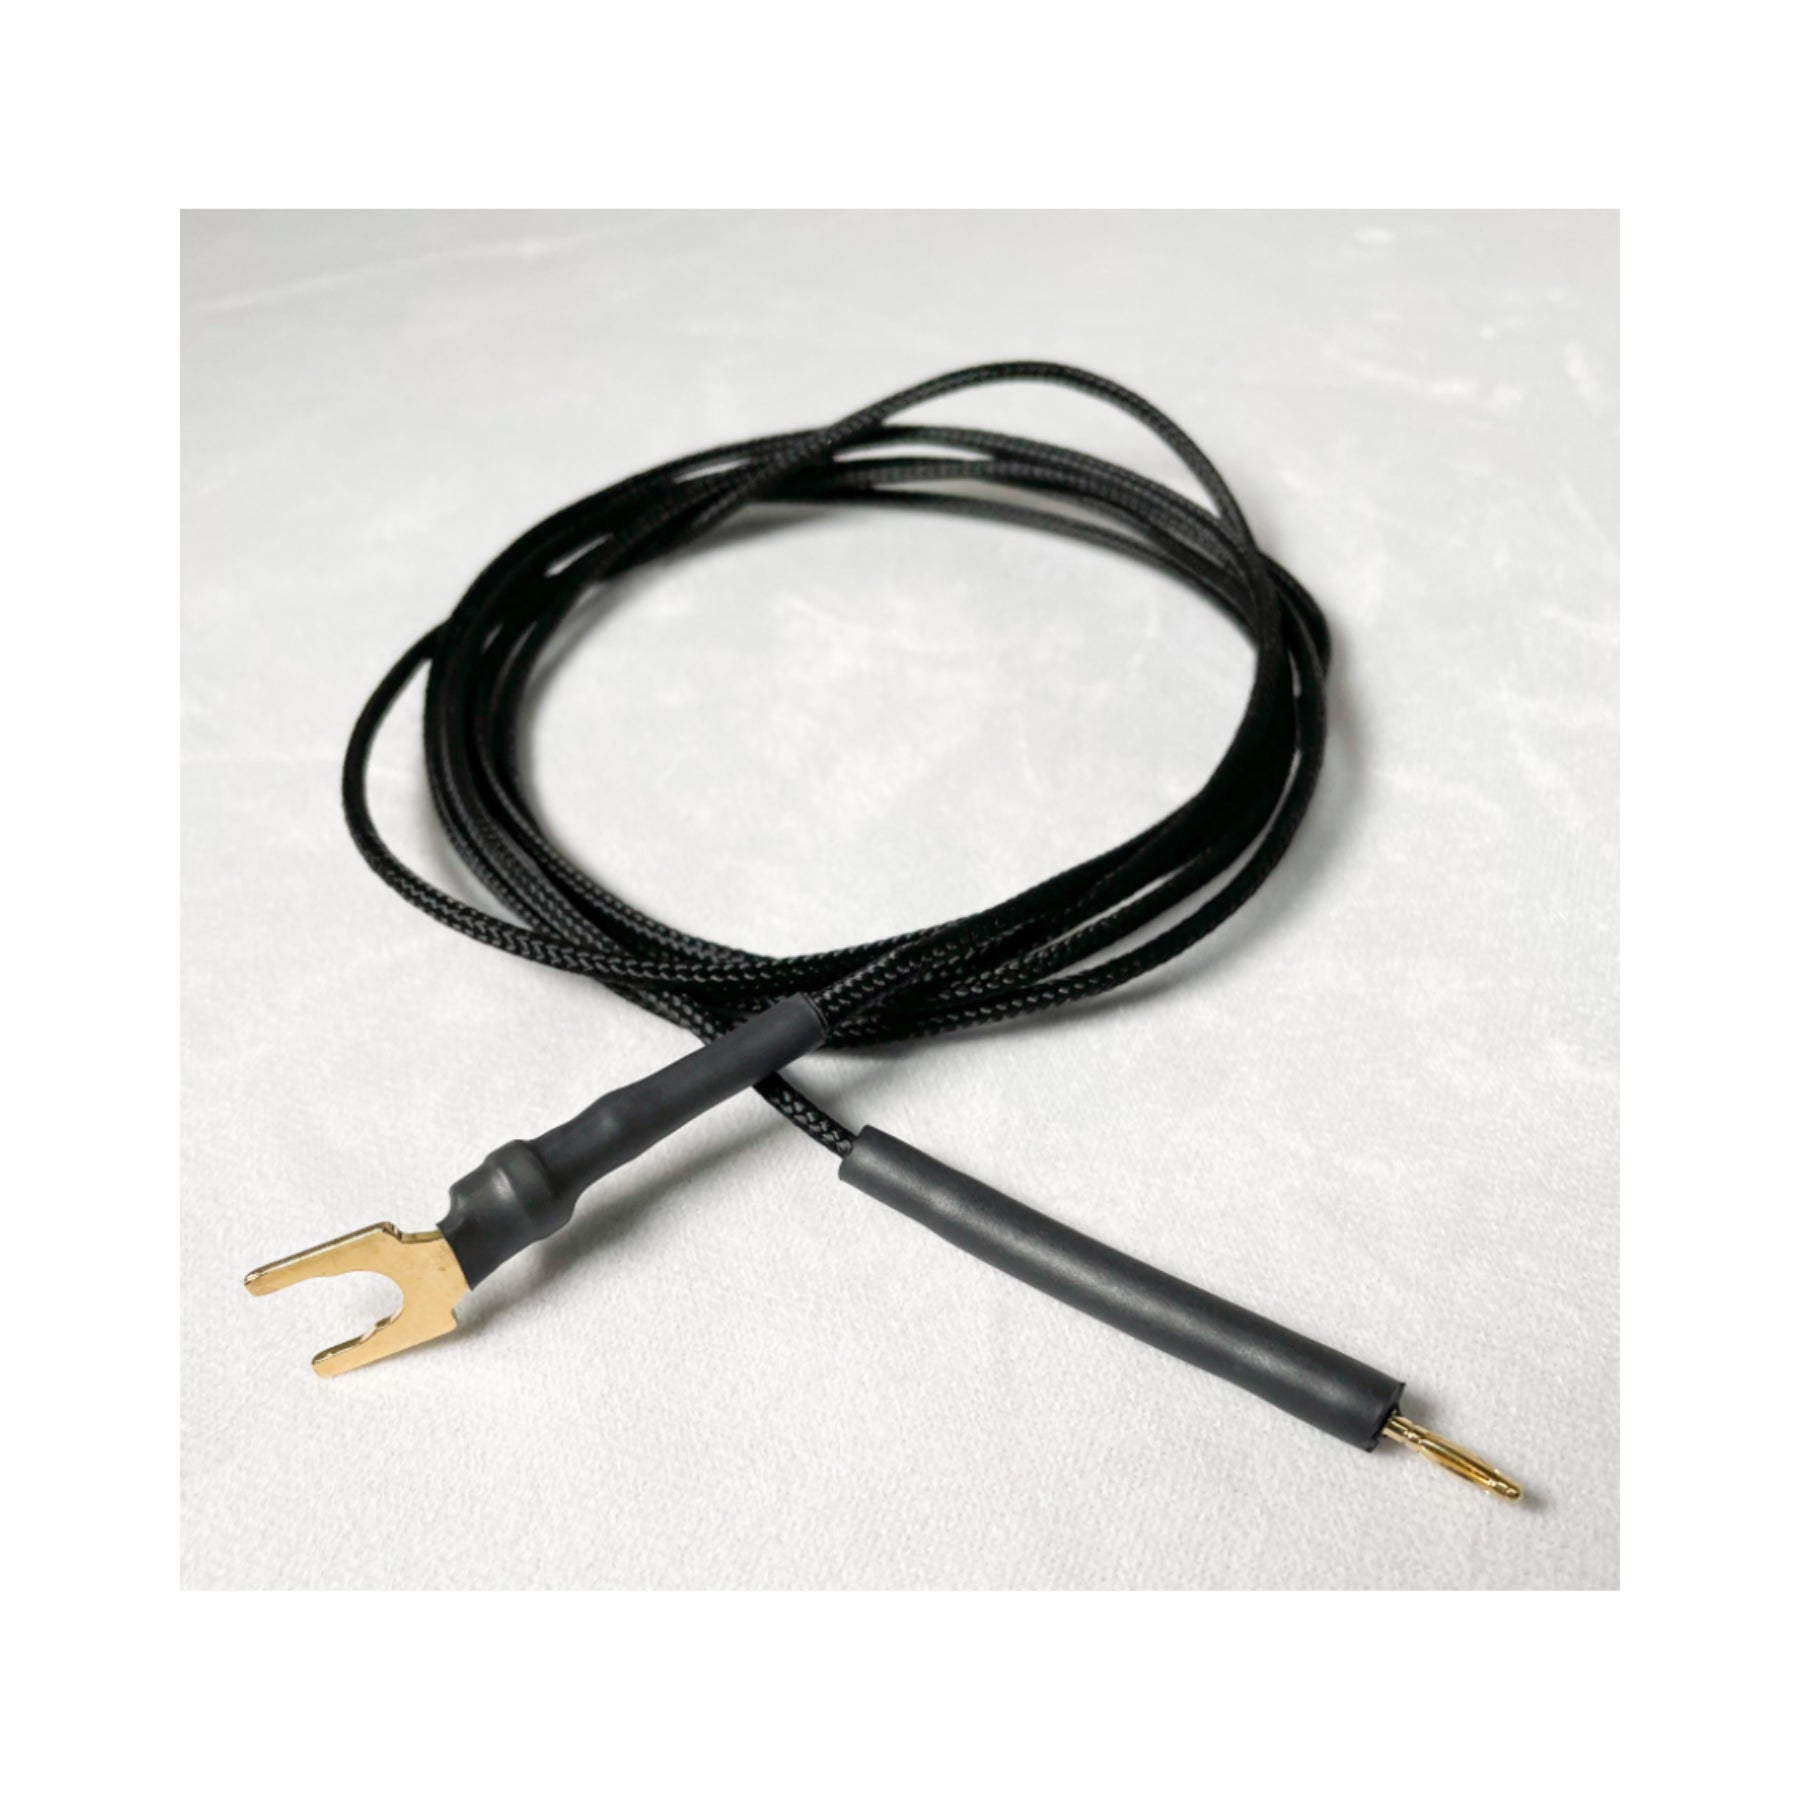 Foundation　Grounding　Synergistic　ListenUp　Research　Cable